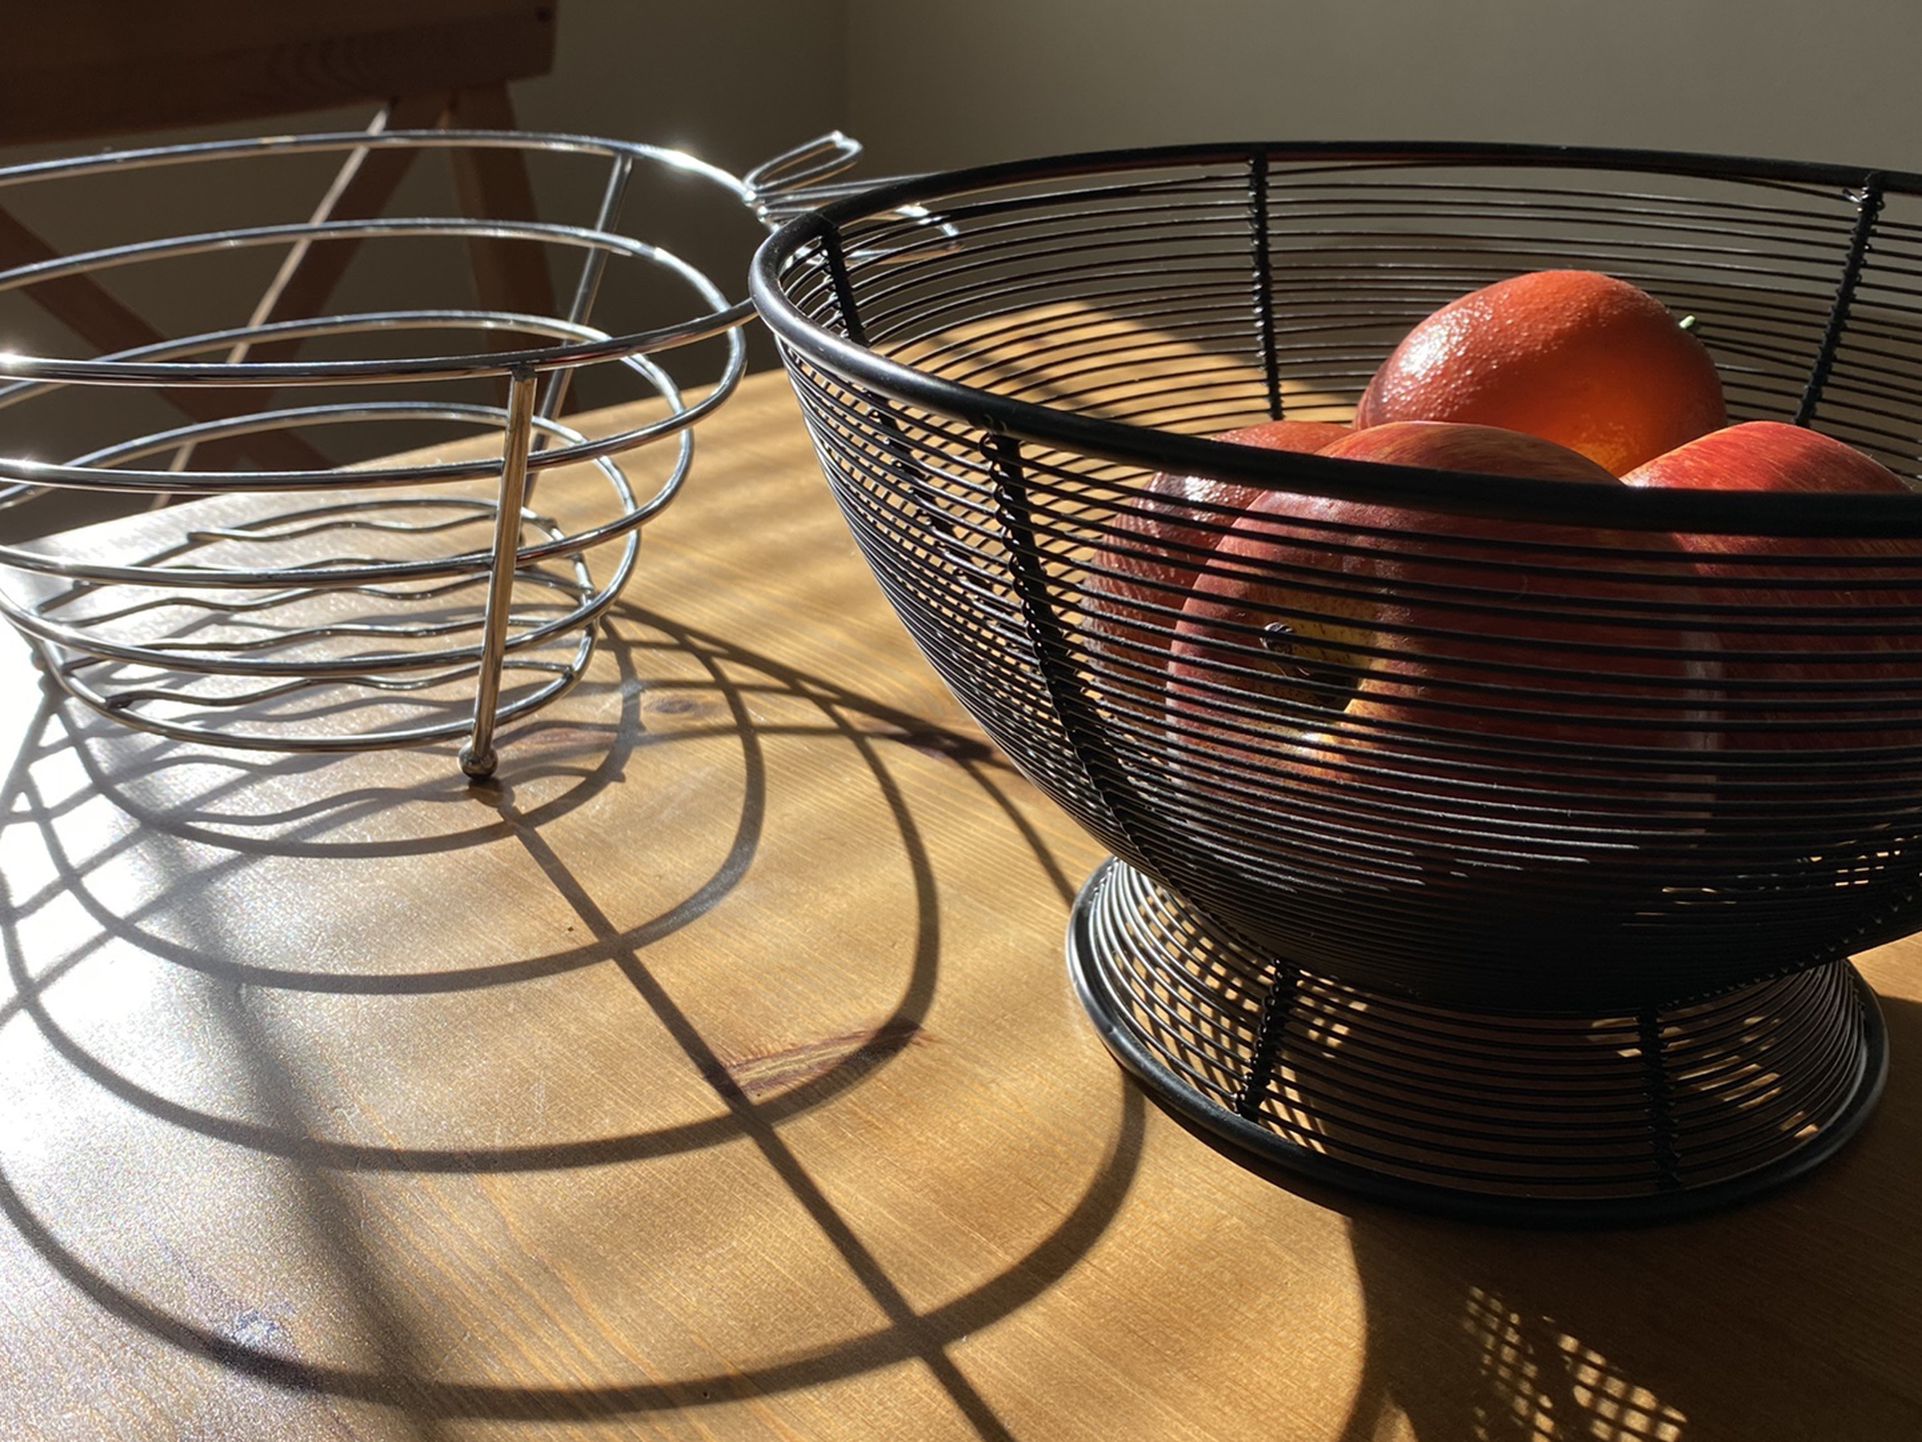 2 Fruit Bowls With Faux Apples